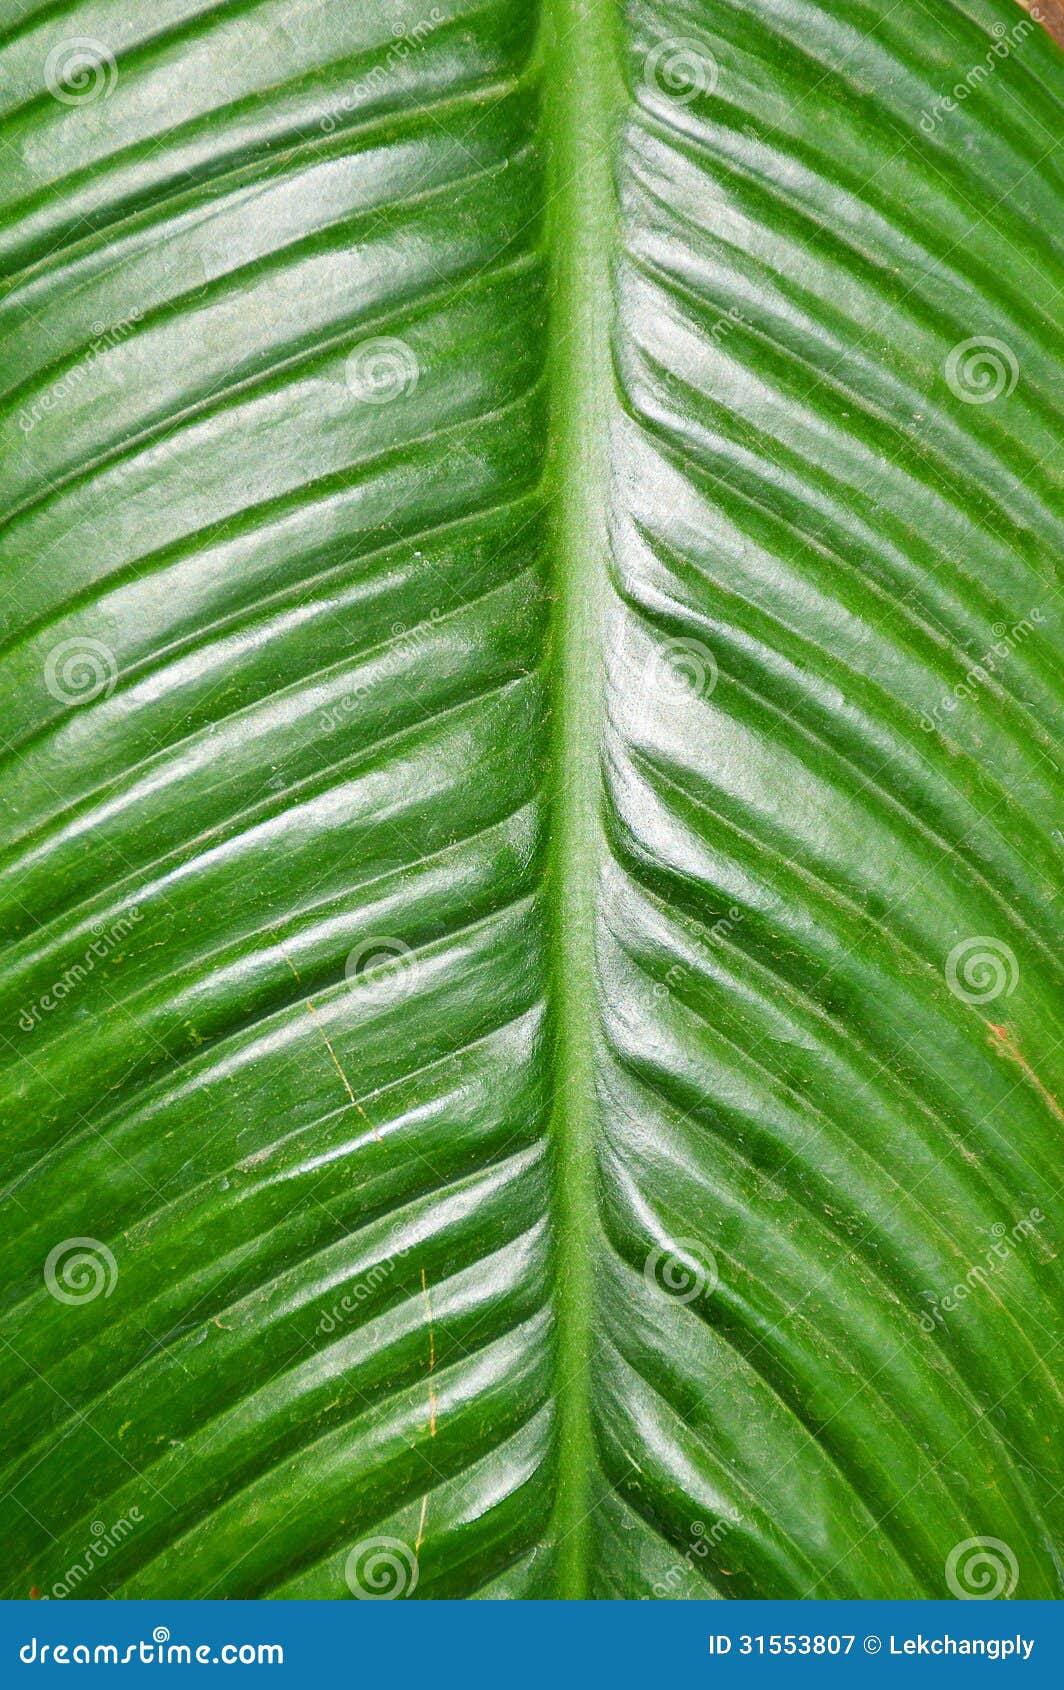 Green leaf background stock image. Image of drop, closeup - 31553807